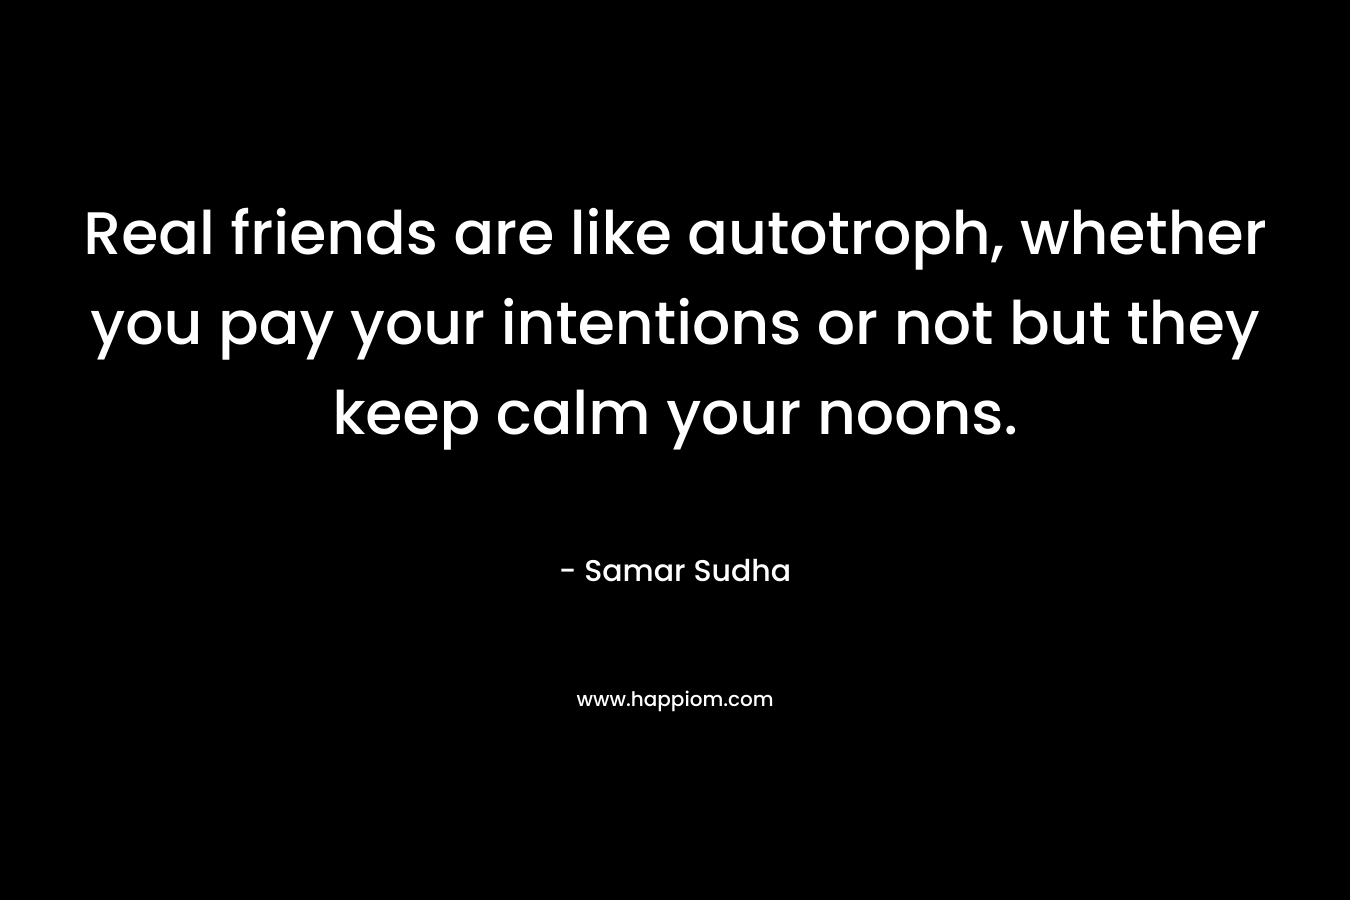 Real friends are like autotroph, whether you pay your intentions or not but they keep calm your noons.